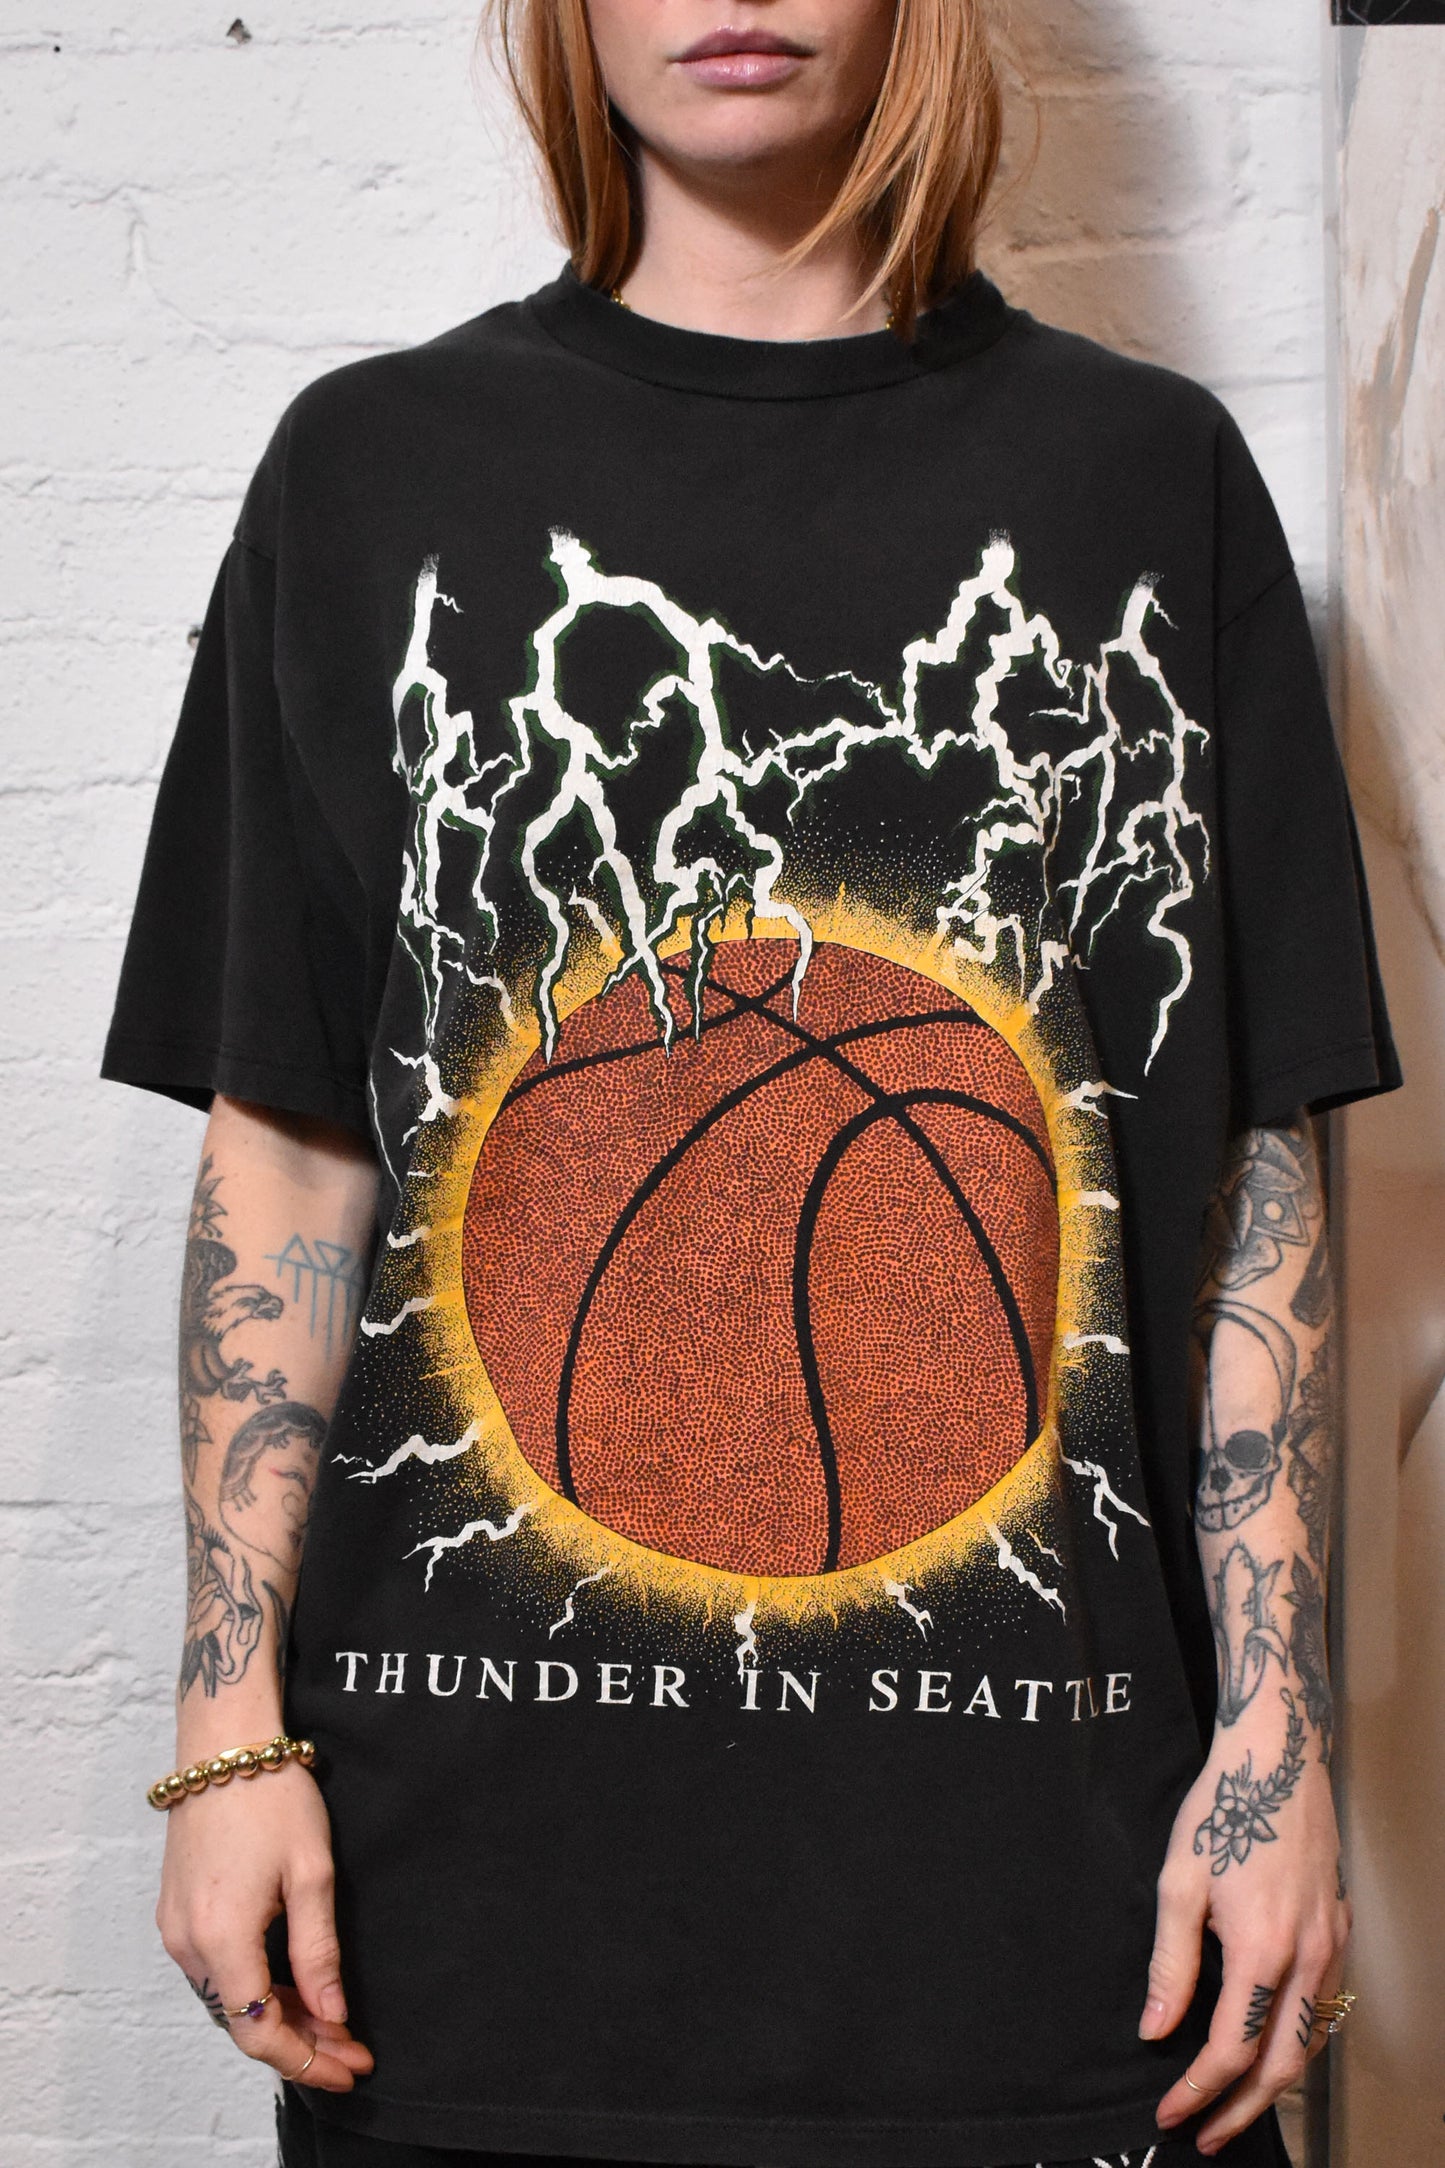 Vintage "Thunder in Seattle" T-shirt